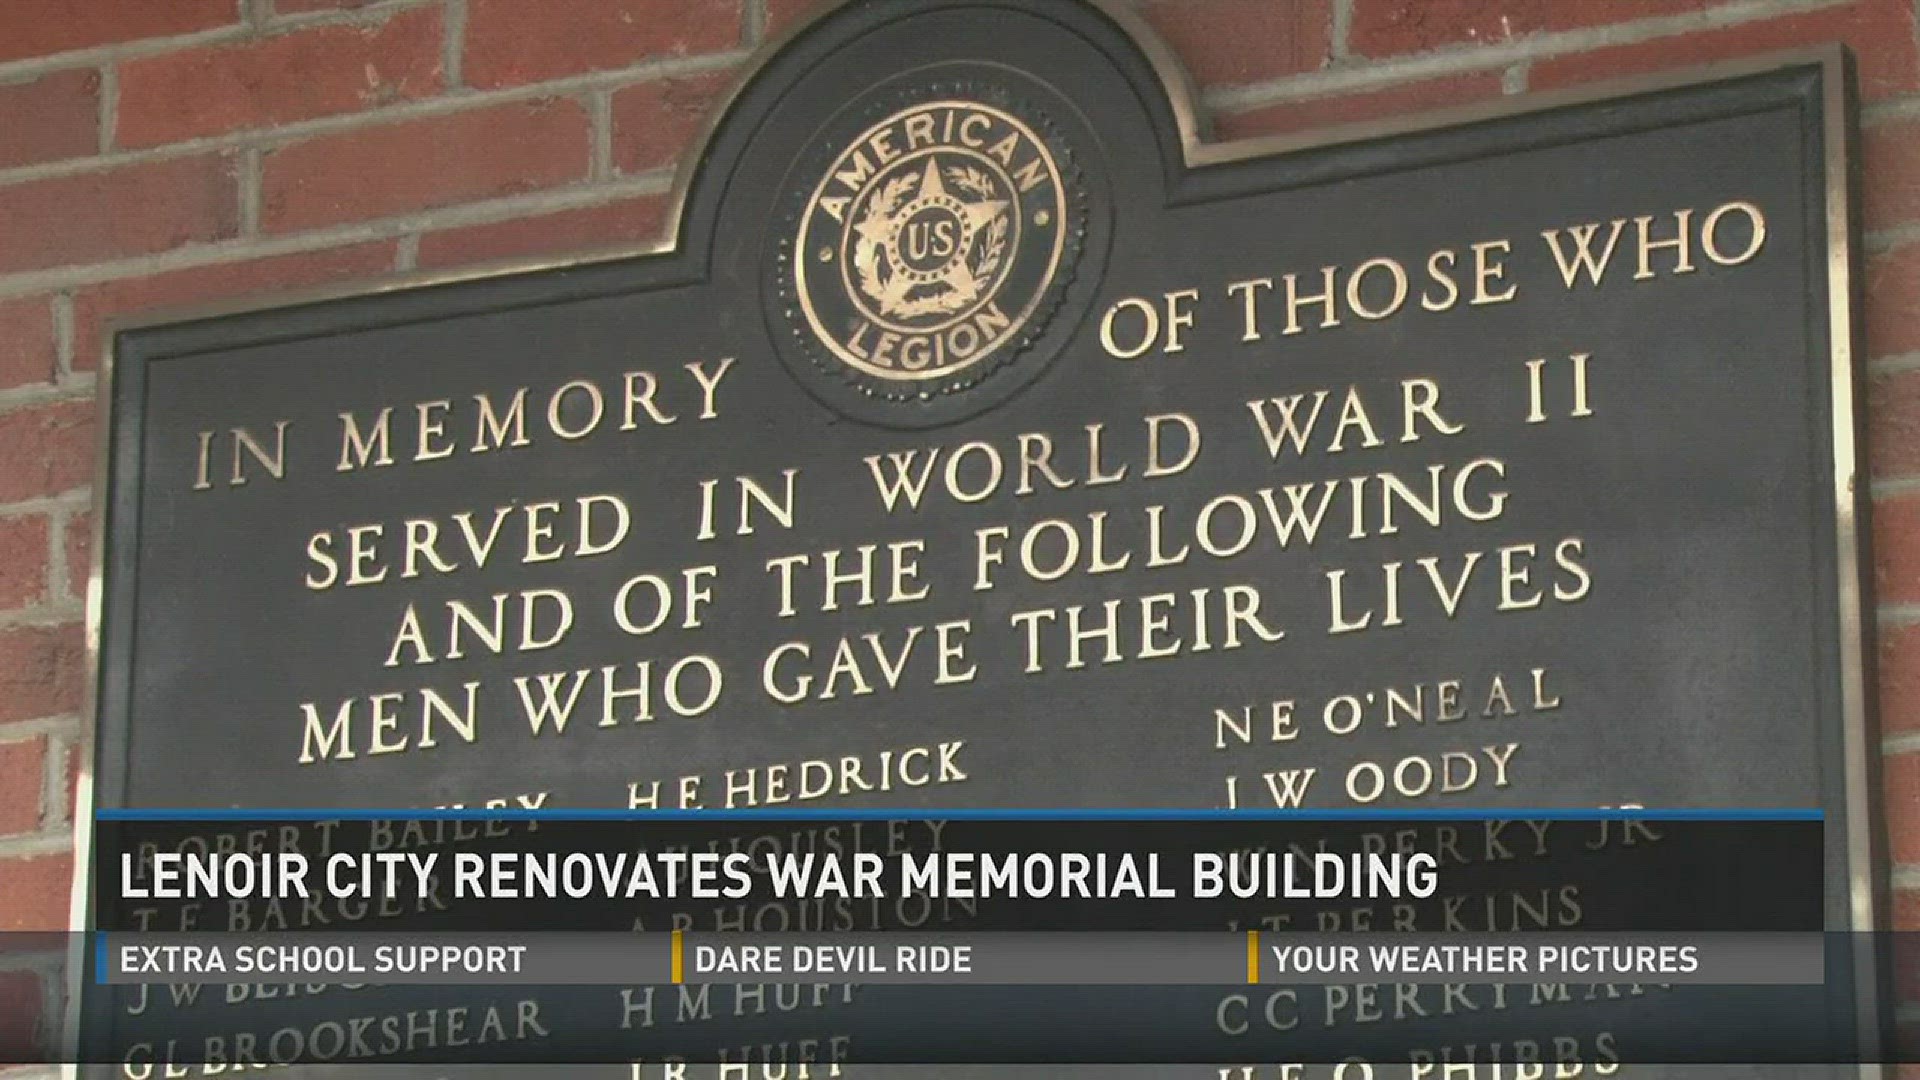 City officials hope renovations to its War Memorial building will help revitalize the area.